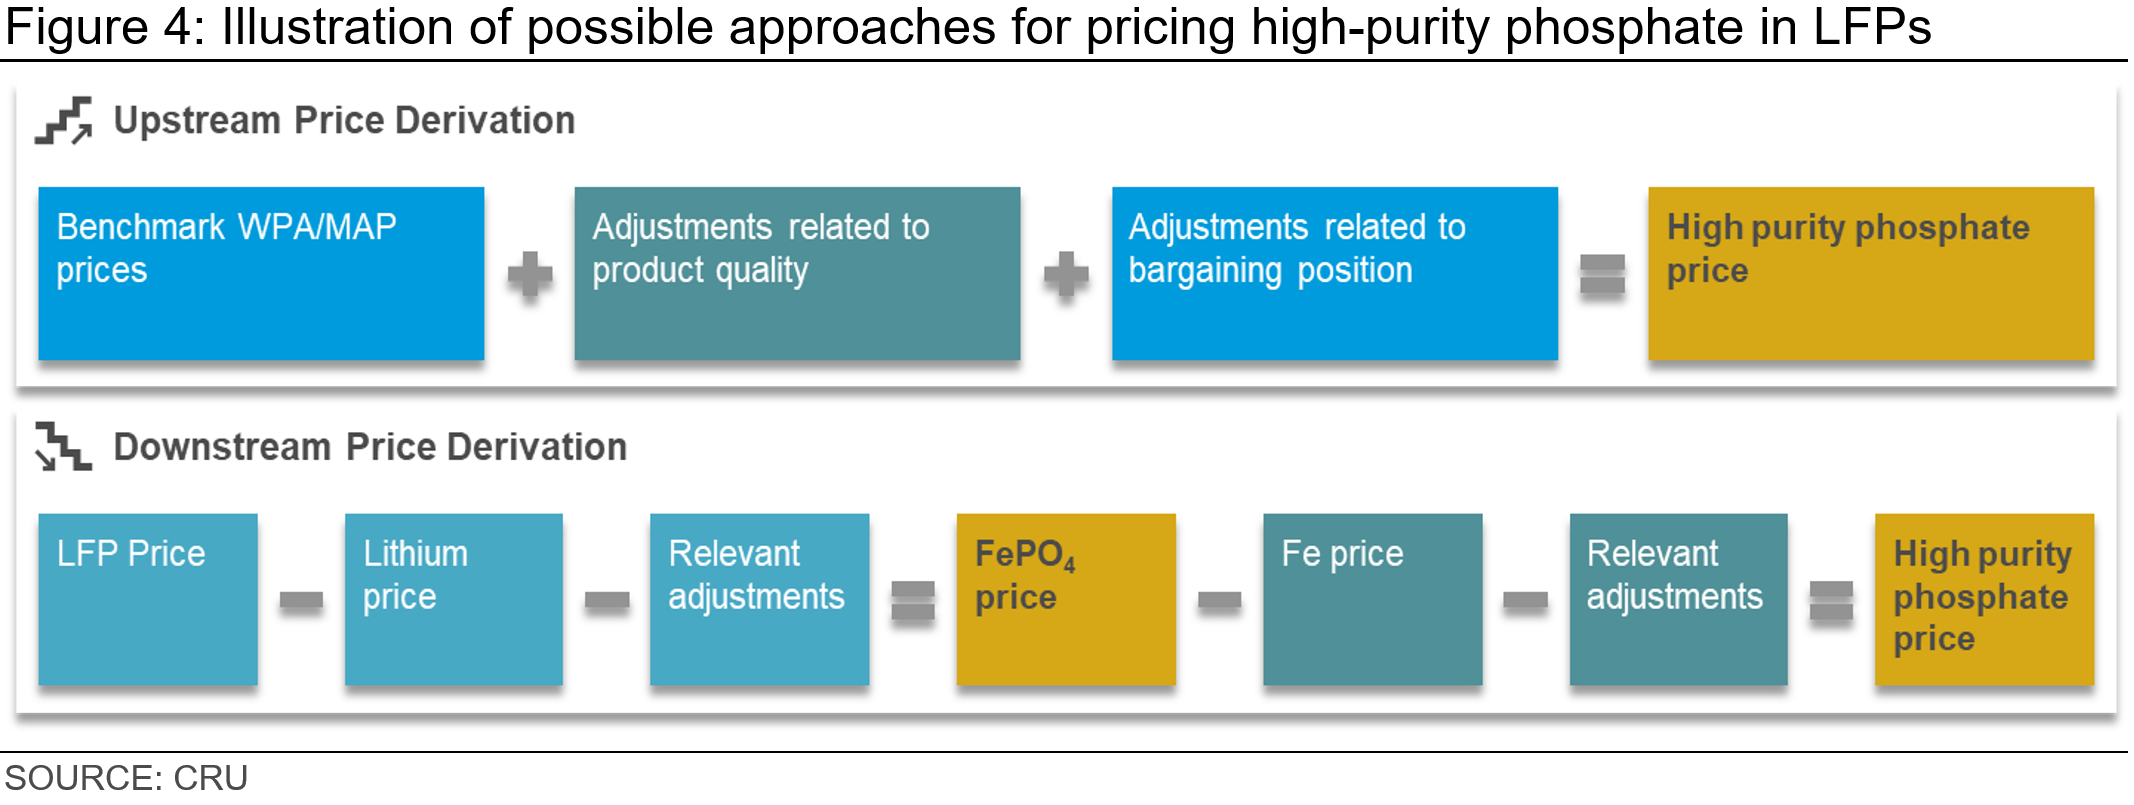 Illustration of possible approaches for pricing high-purity phosphate in LFPs